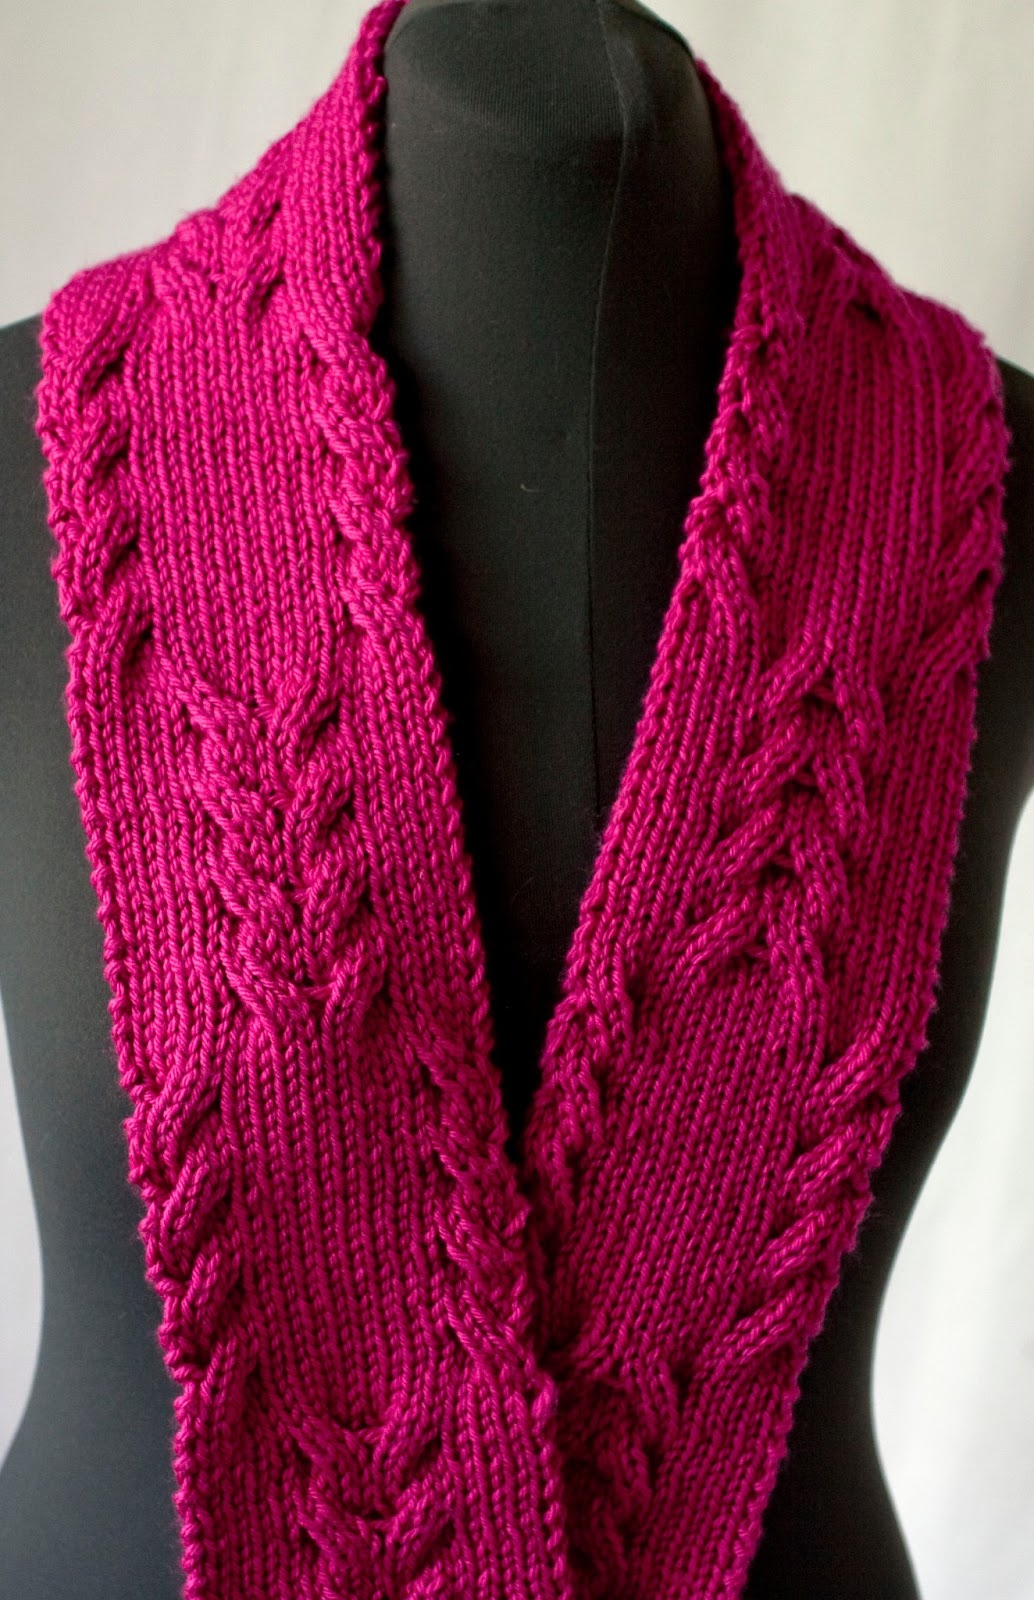 Knitting Pattern For Scarfs Reversible Scarf Knitting Patterns In The Loop Knitting